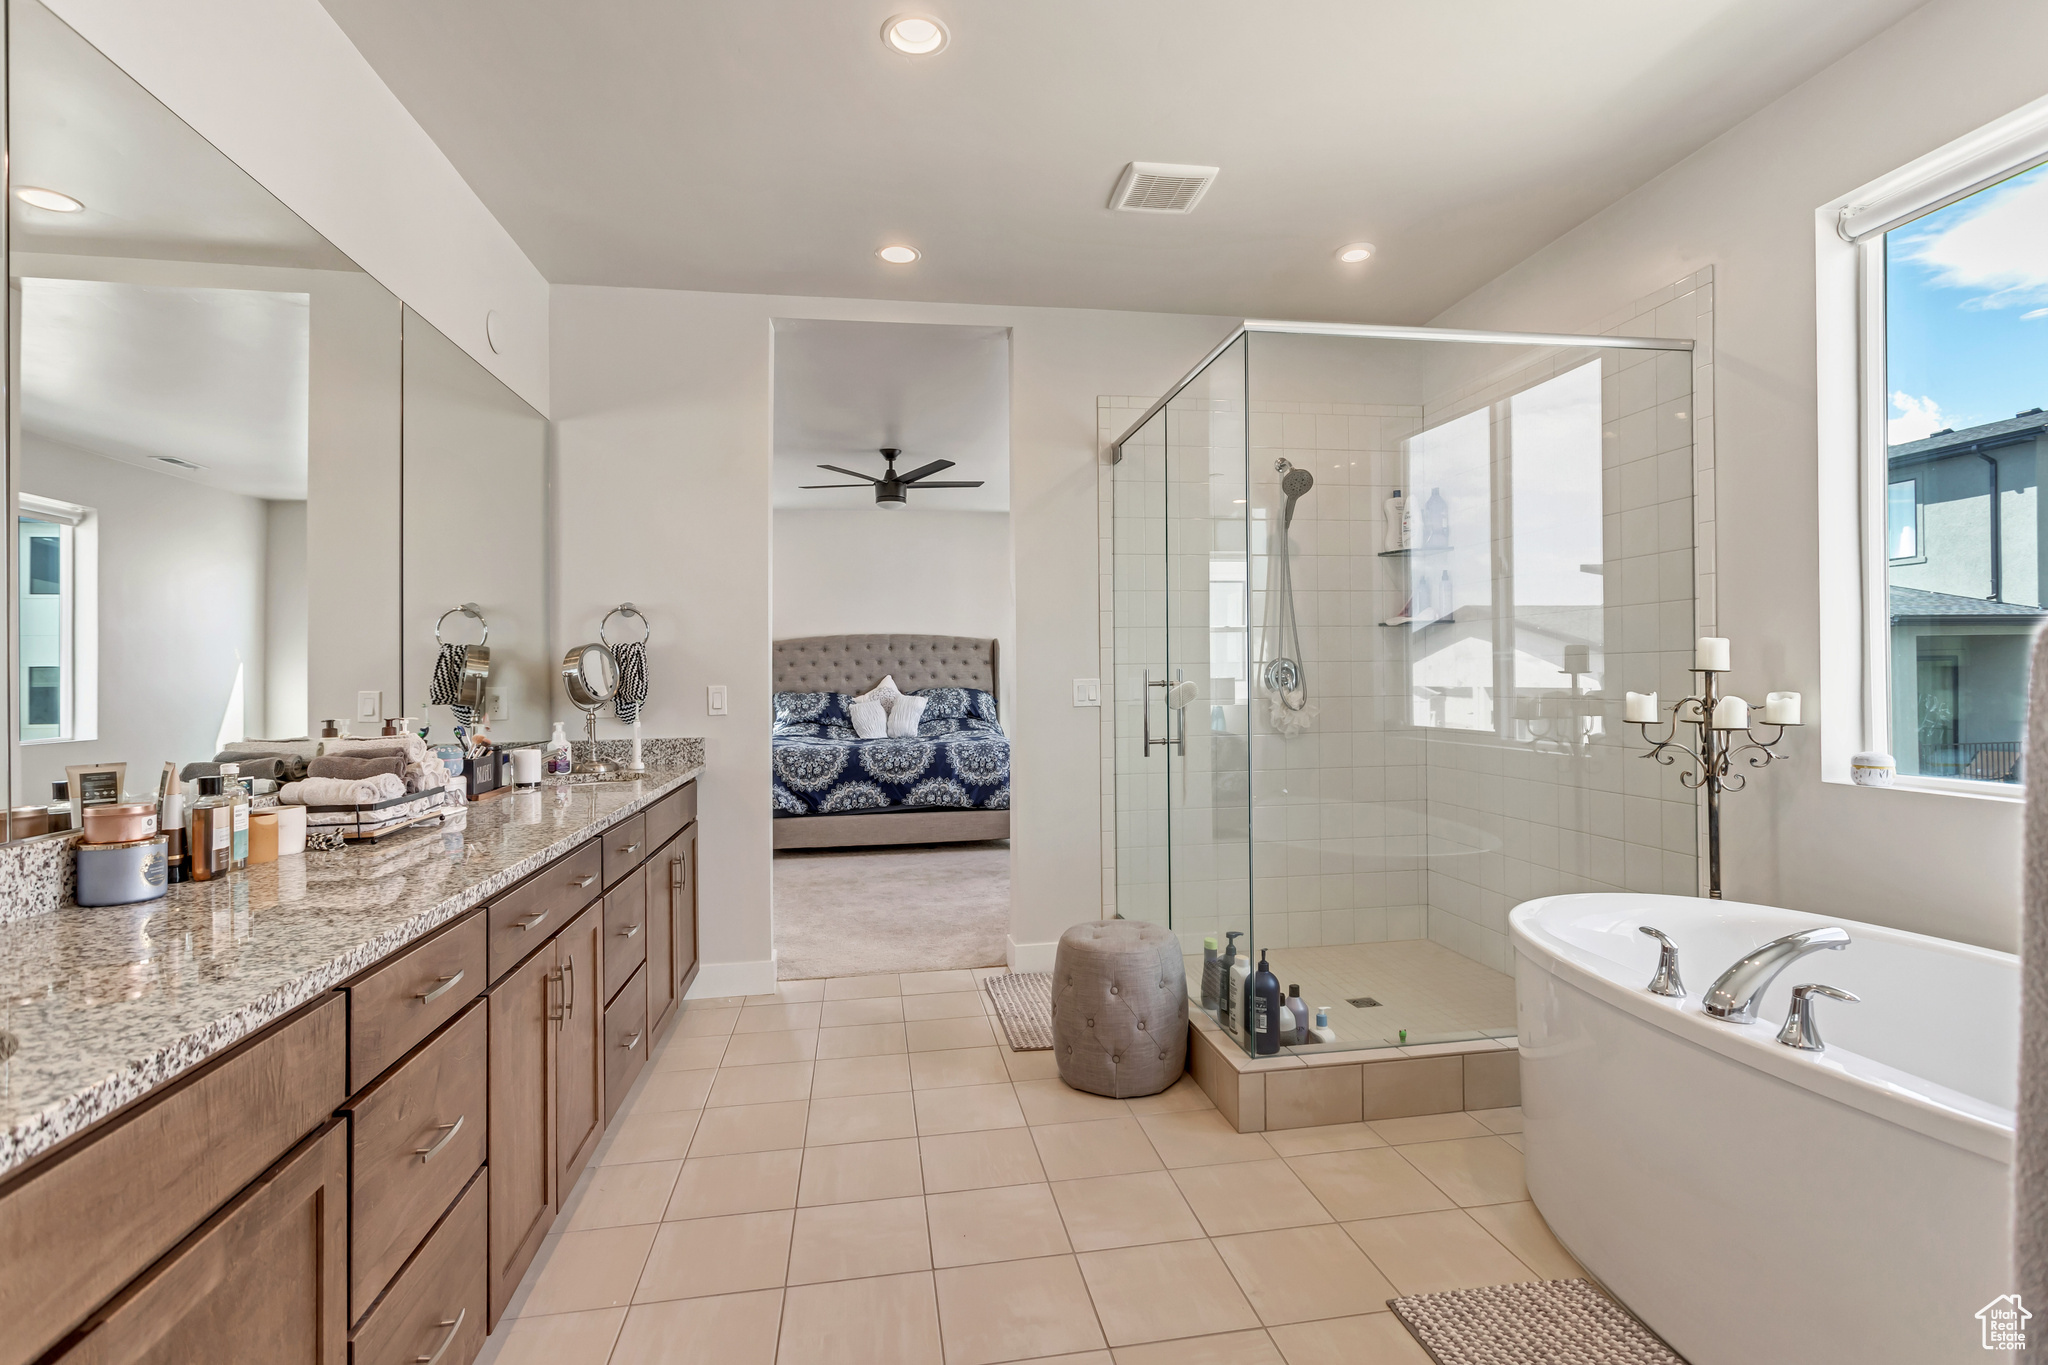 Bathroom featuring ceiling fan, vanity, tile floors, and separate shower and tub